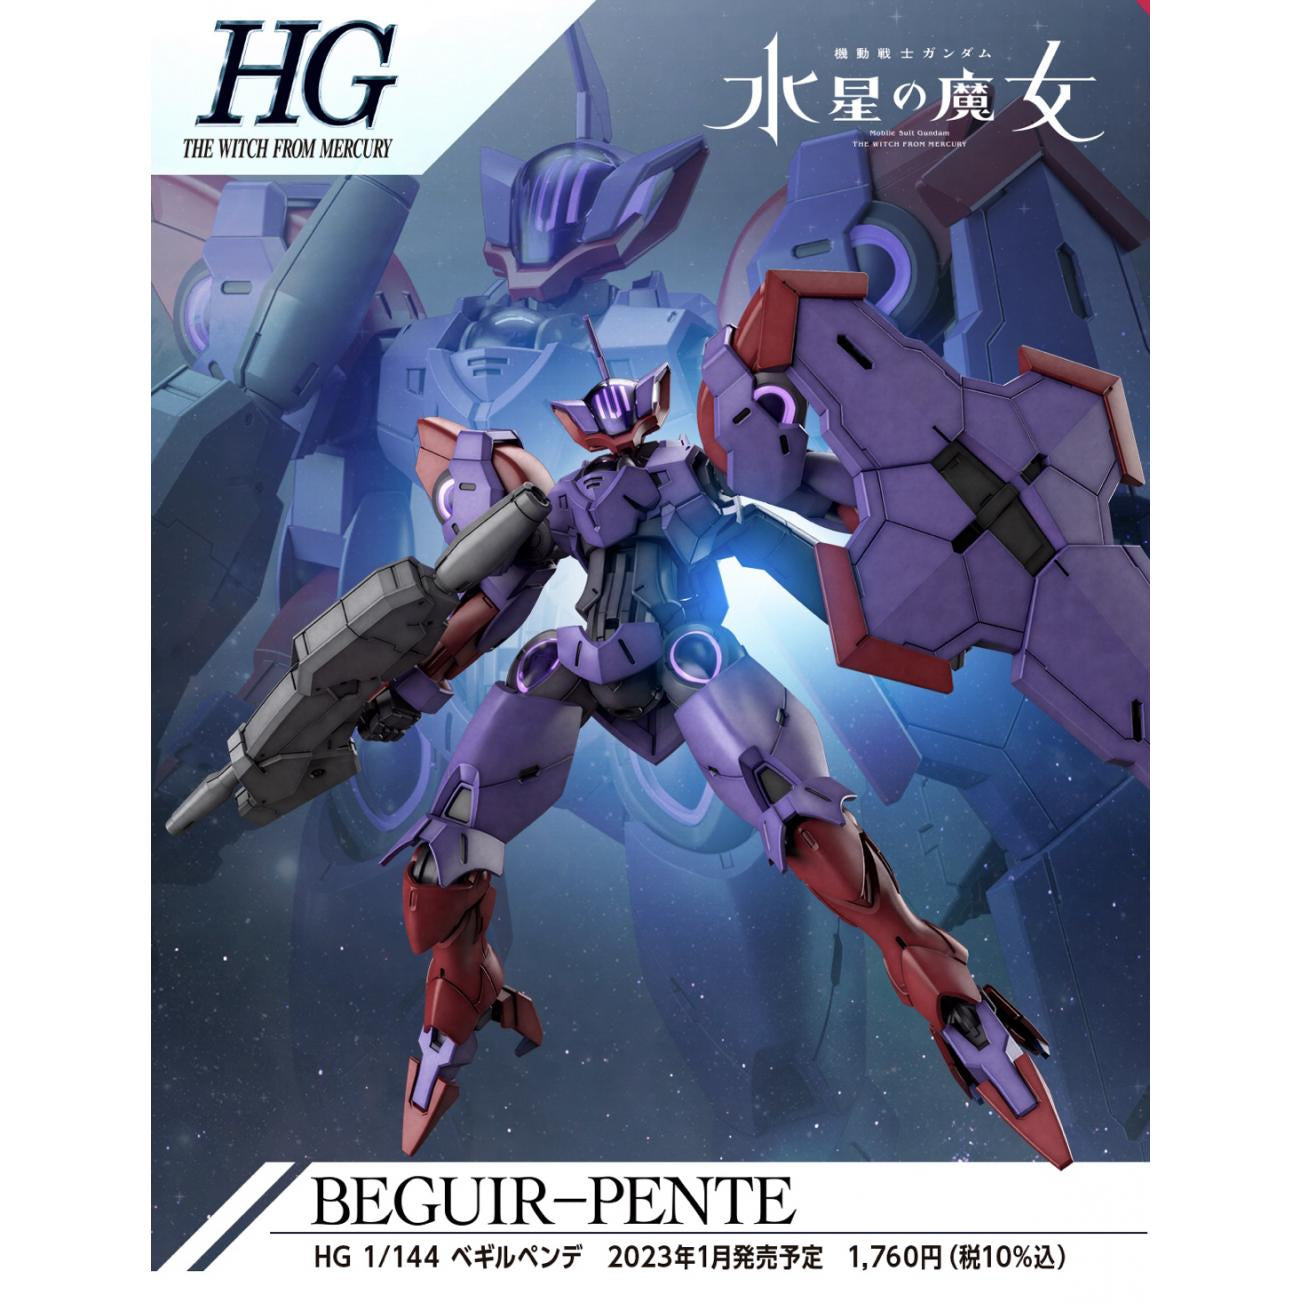 HG 1/144 The Witch From Mercury #12 CEK-077 Beguir-Pente #5065016 by Bandai